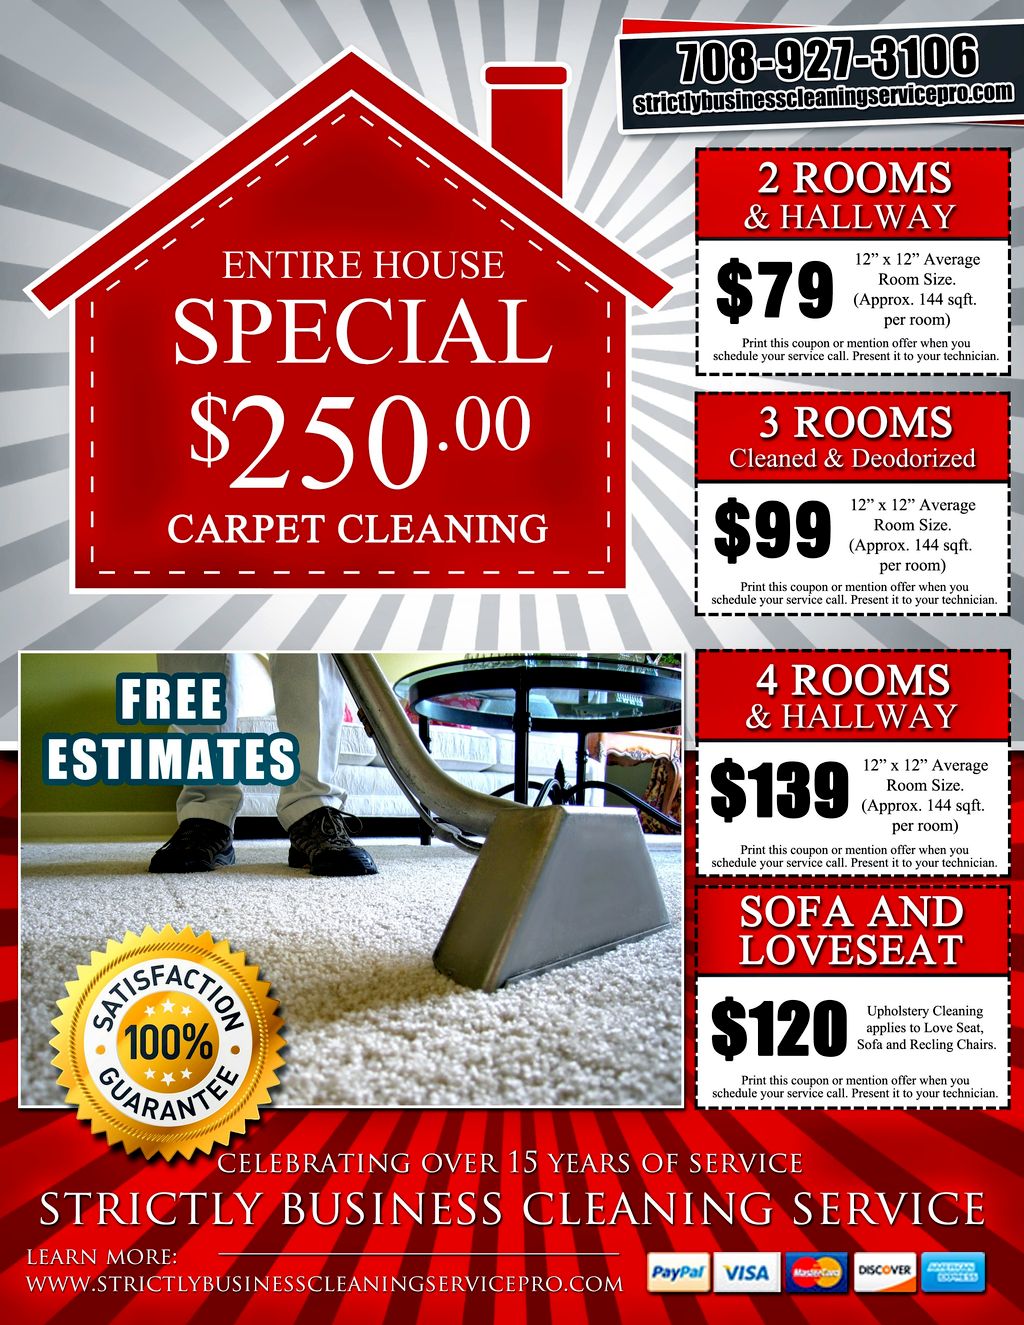 Strictly Business Cleaning Service